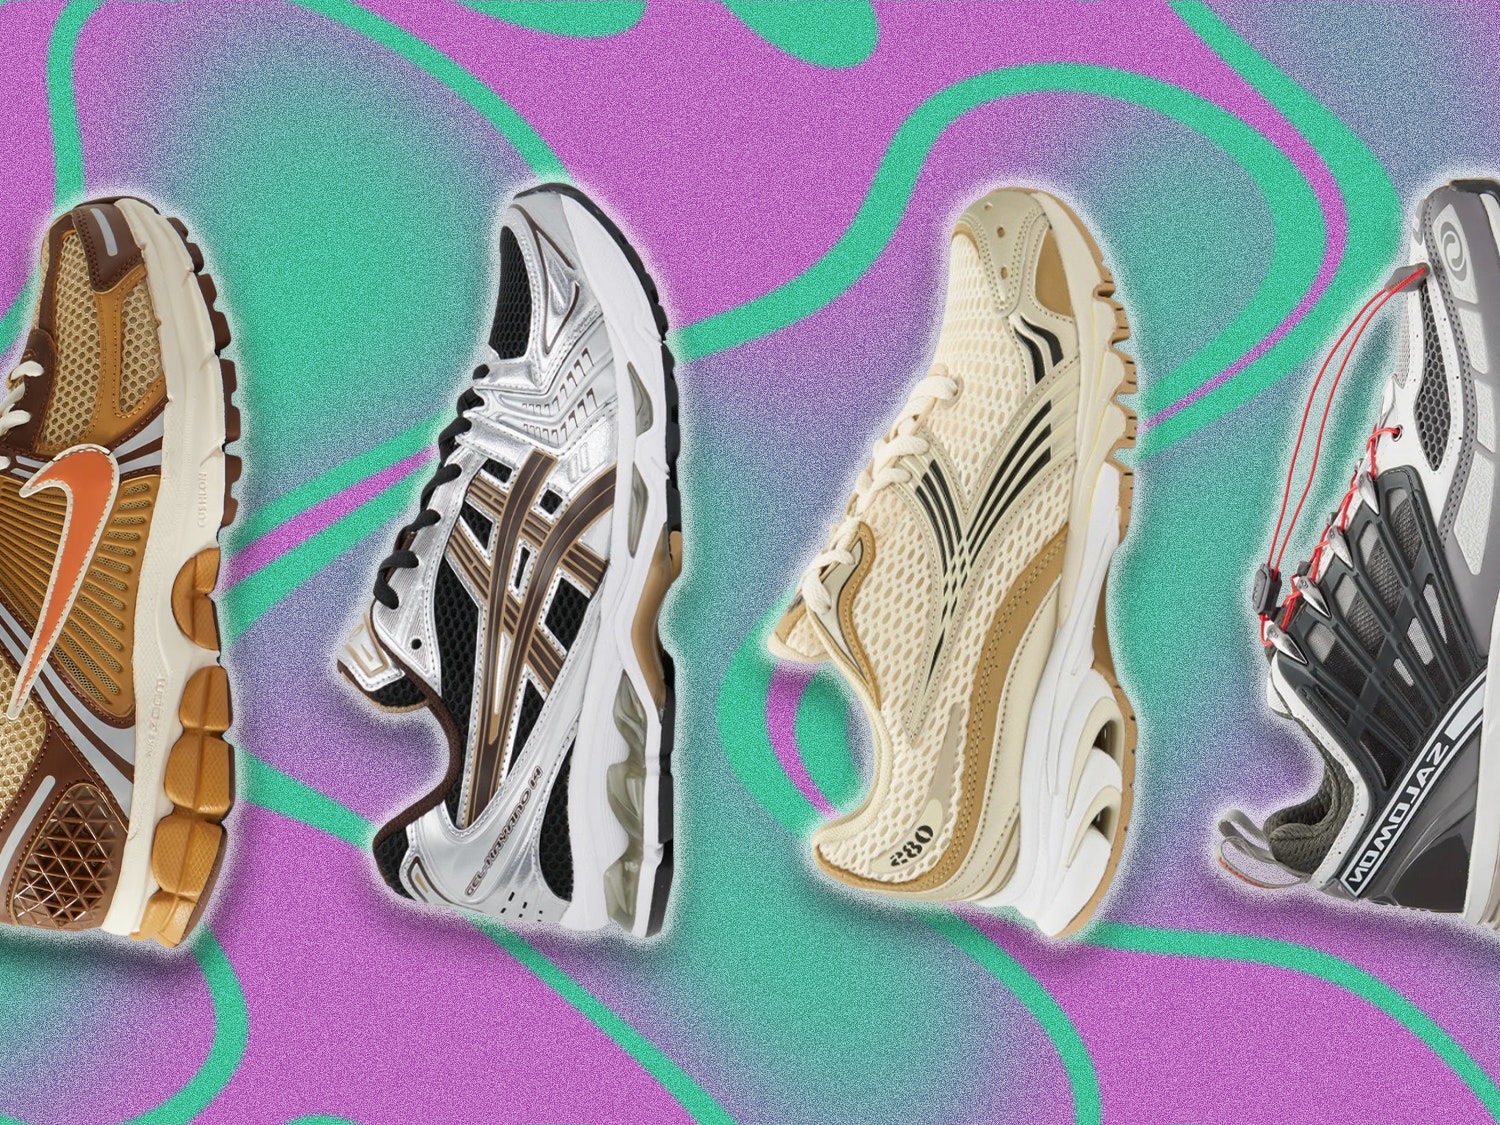 These Are the Hottest Retro Sneakers on the Market